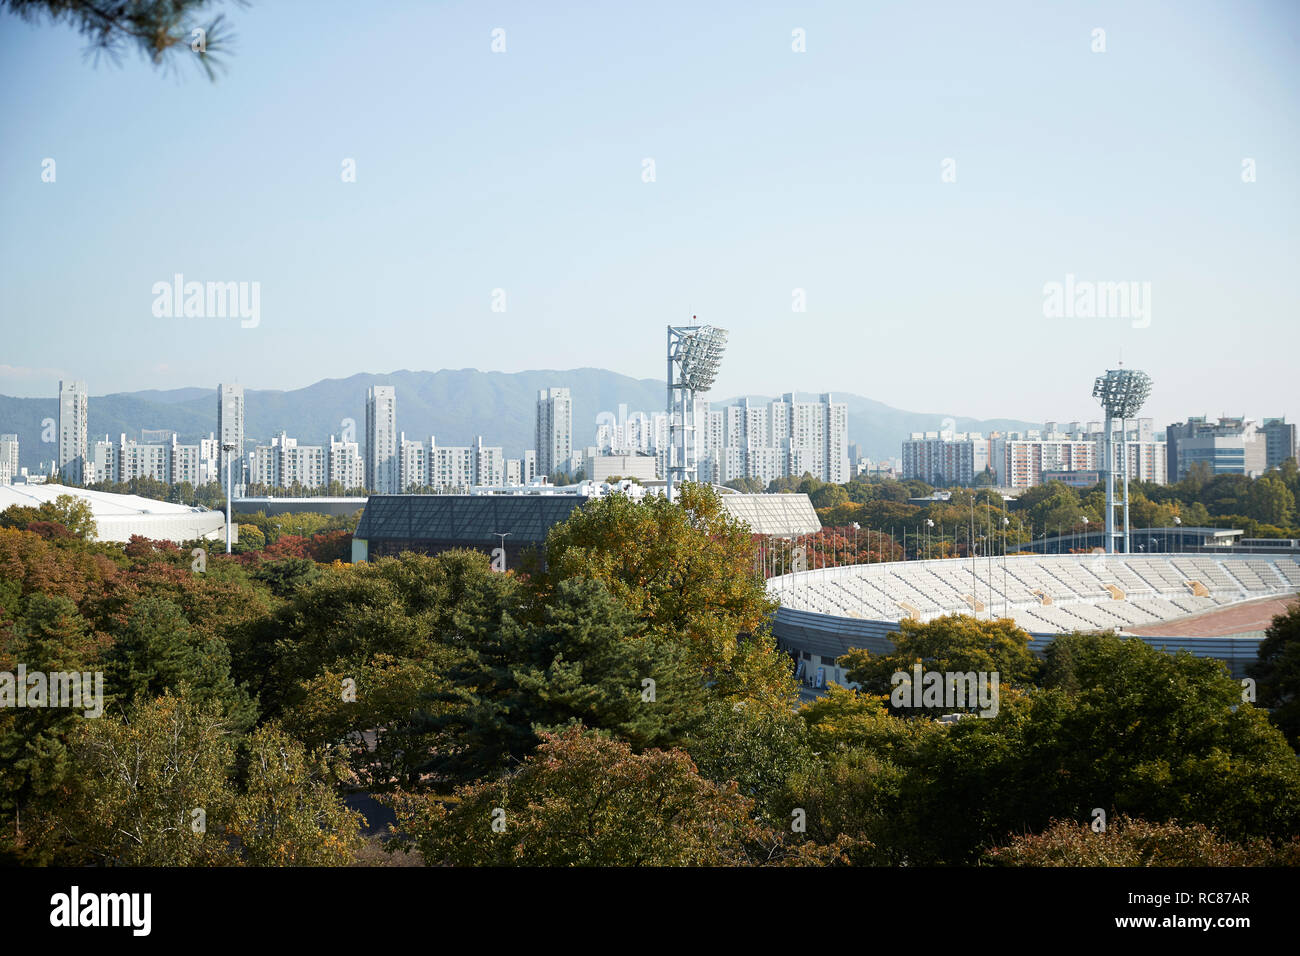 Skyline in daytime, national park and sports stadium in foreground, Seoul, South Korea Stock Photo